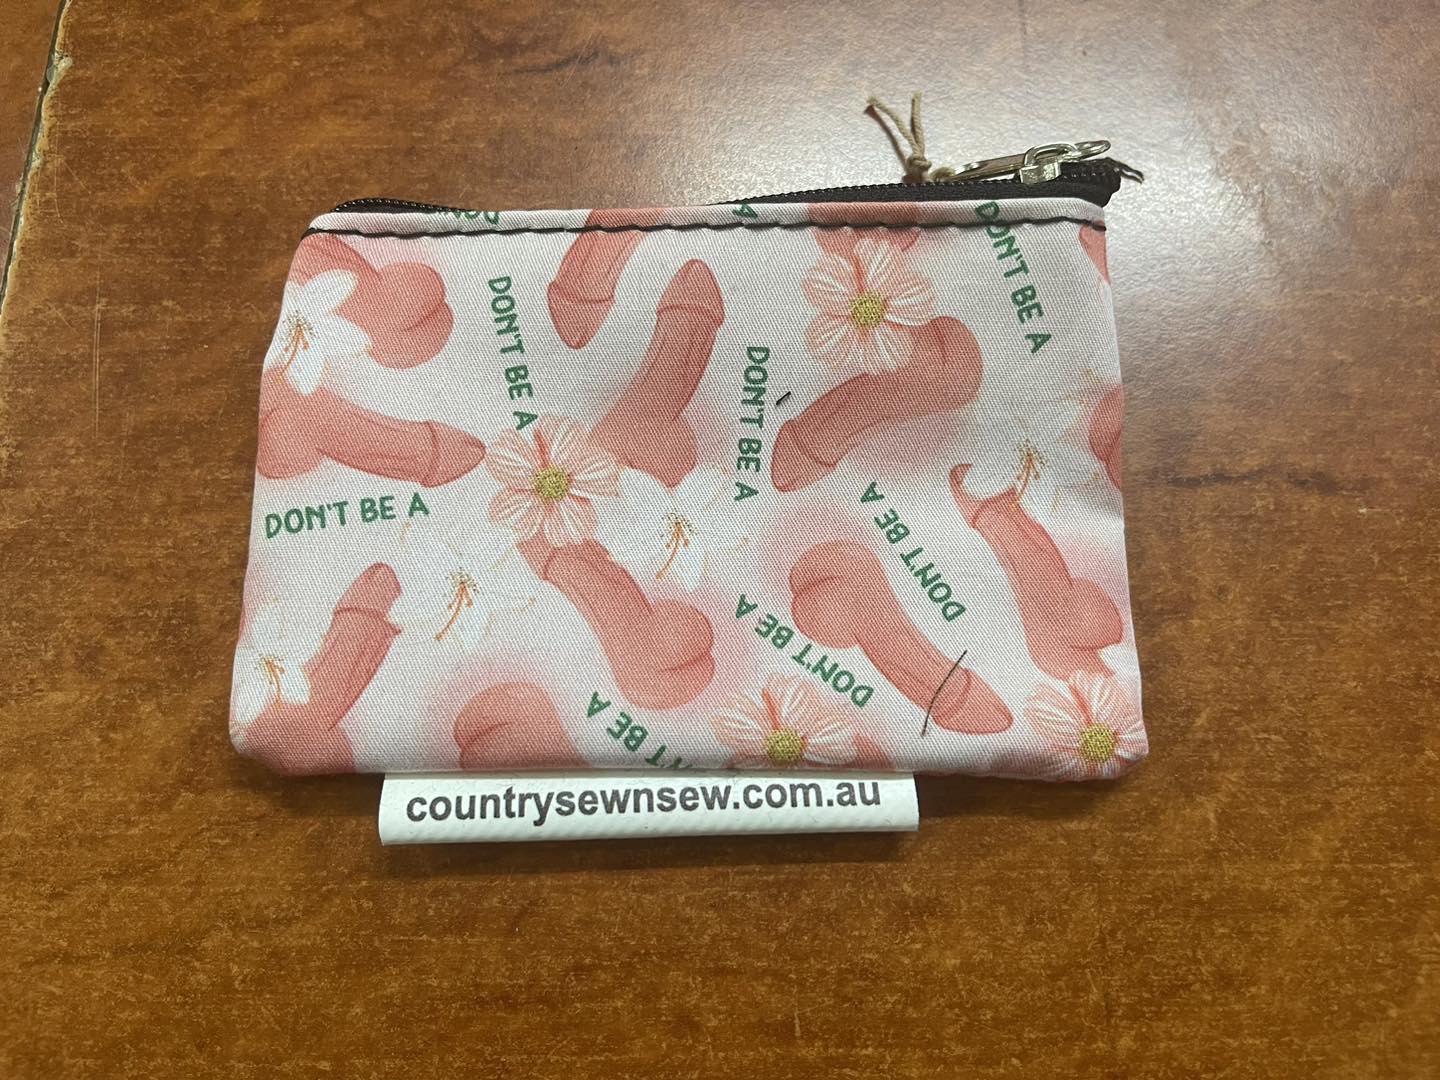 Ready made Coin purse - Don't be a dick